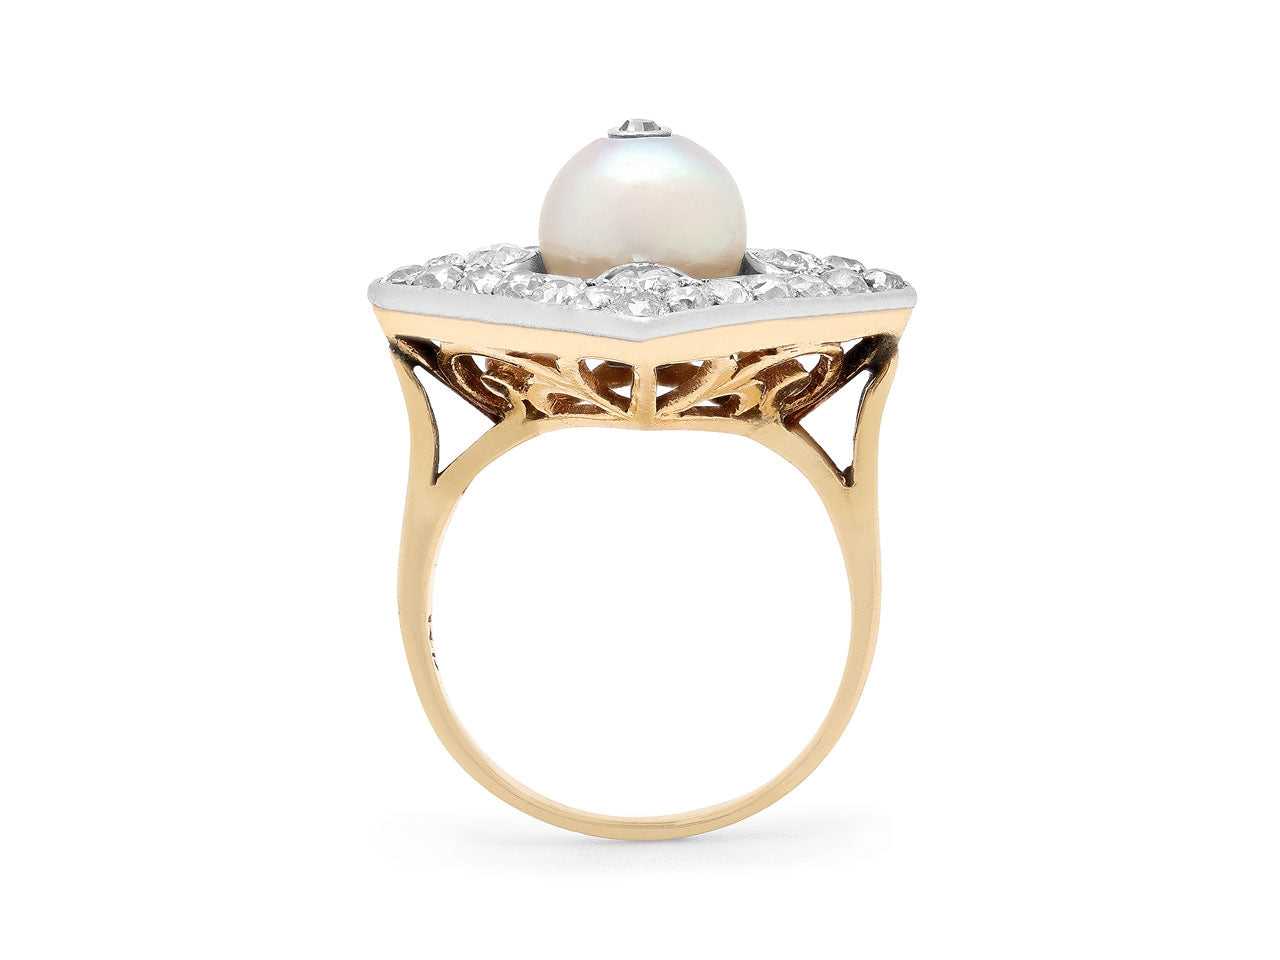 Antique Edwardian Cultured Pearl and Diamond Ring in 14K and Platinum